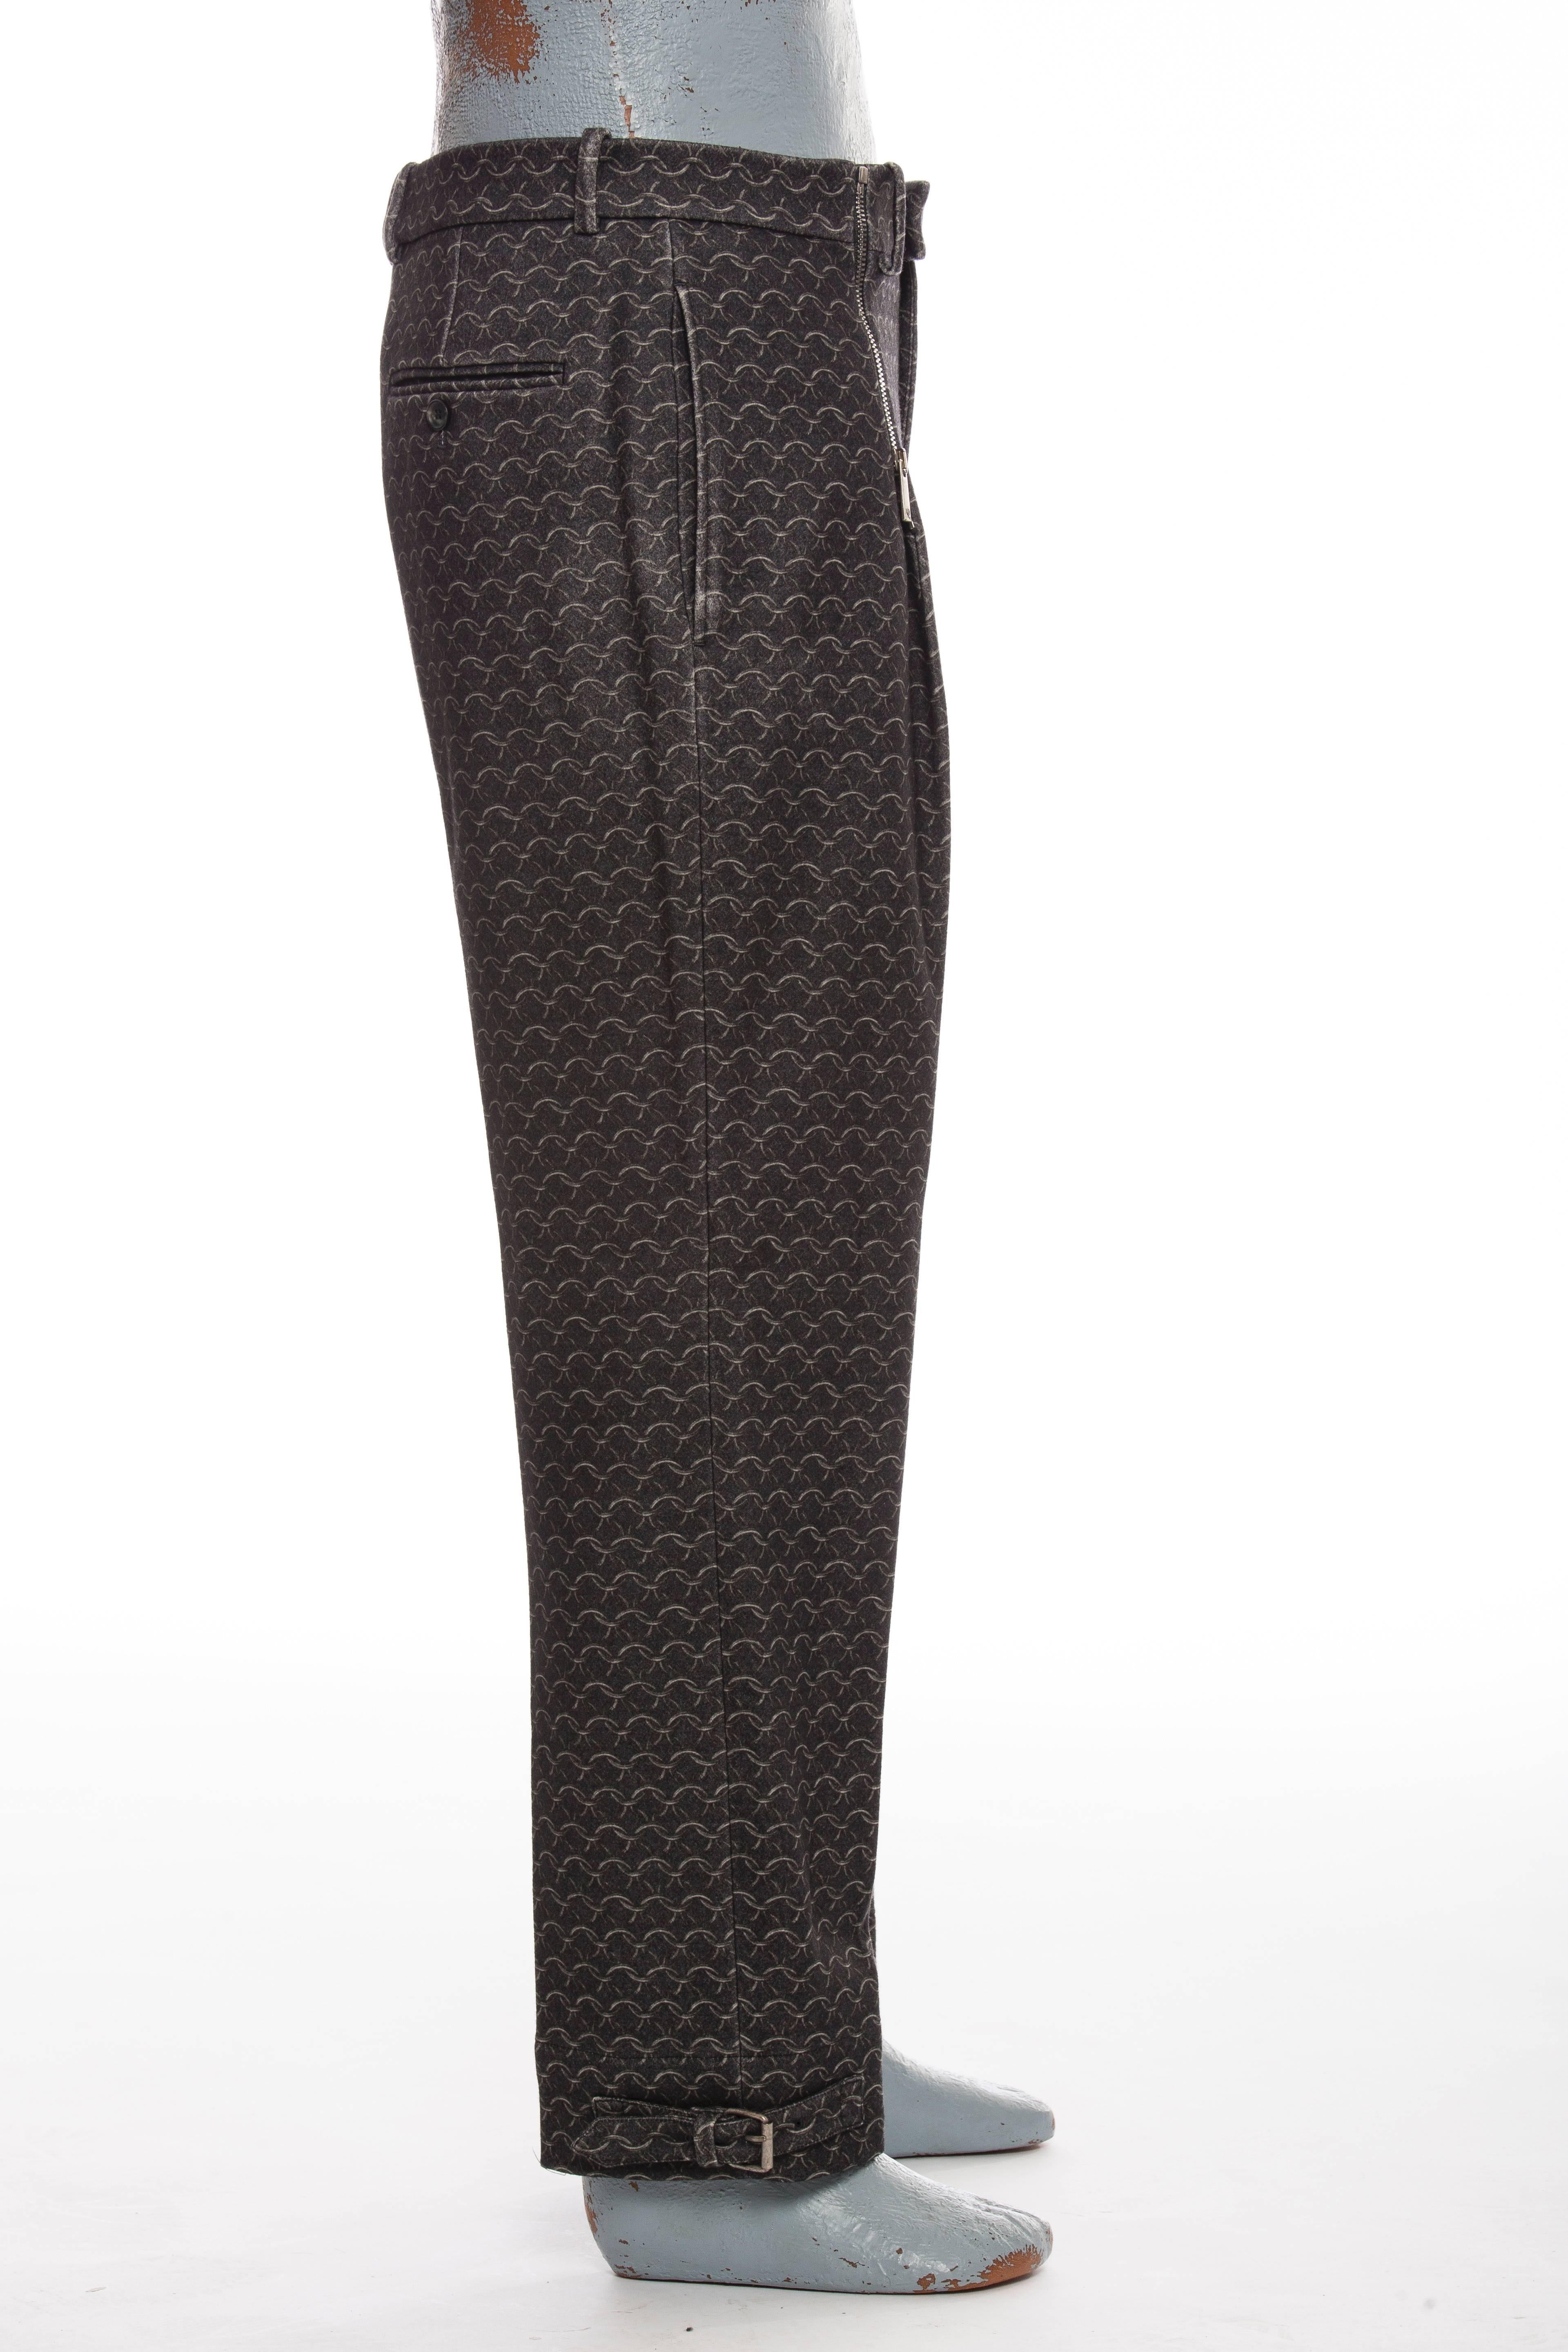 Alexander McQueen, Spring - Summer 2010; The Bone Collector Collection men's wool chain-mail print straight-leg pants with three pockets, tonal stitching throughout and zip closures at front. Made in Italy. Size not listed, estimated from